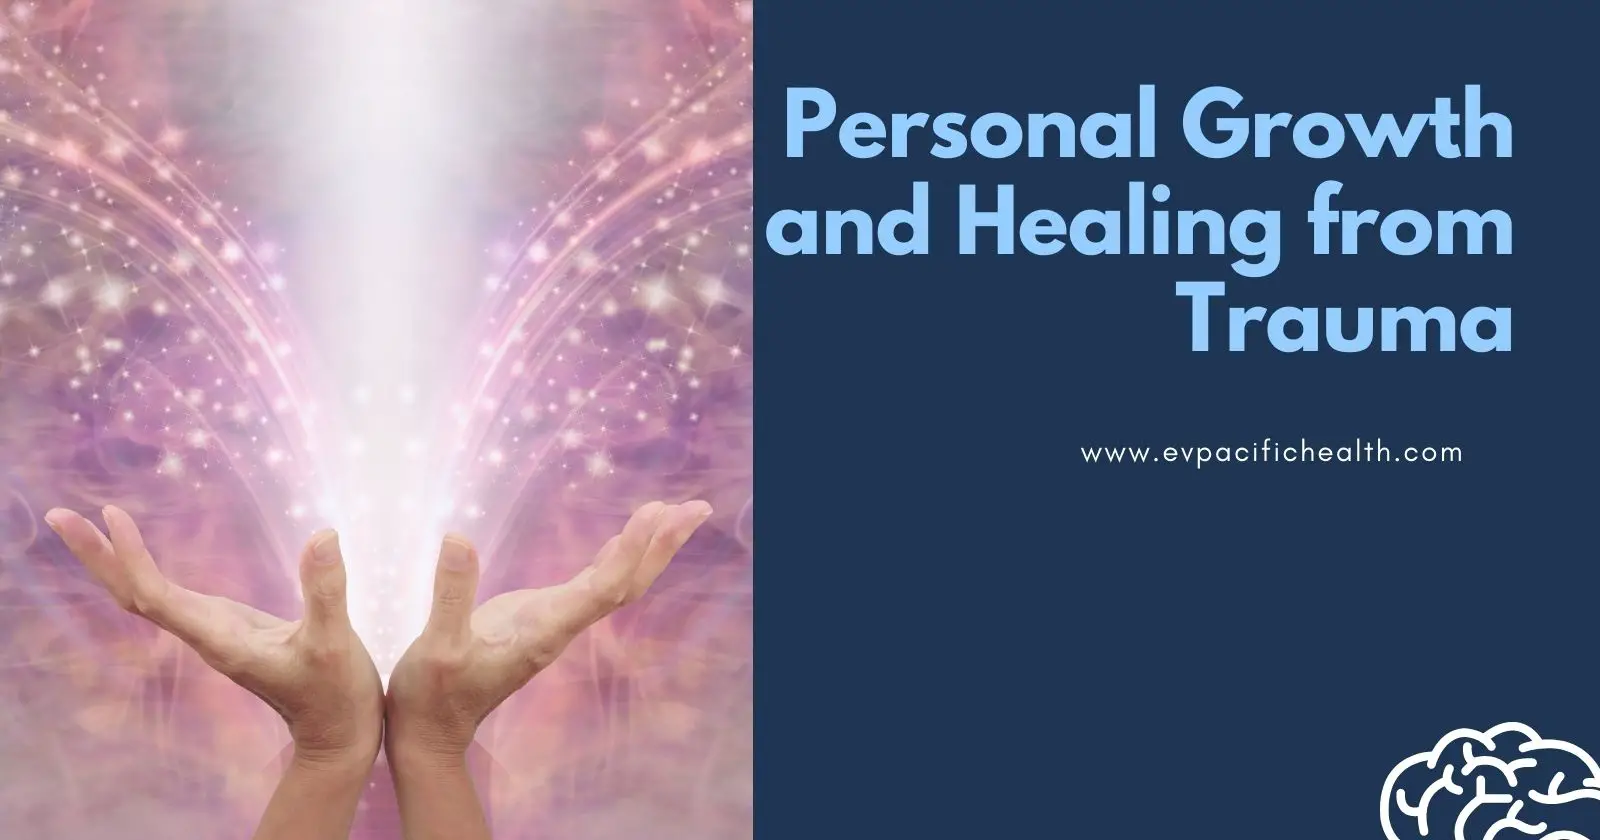 Personal growth and healing from trauma